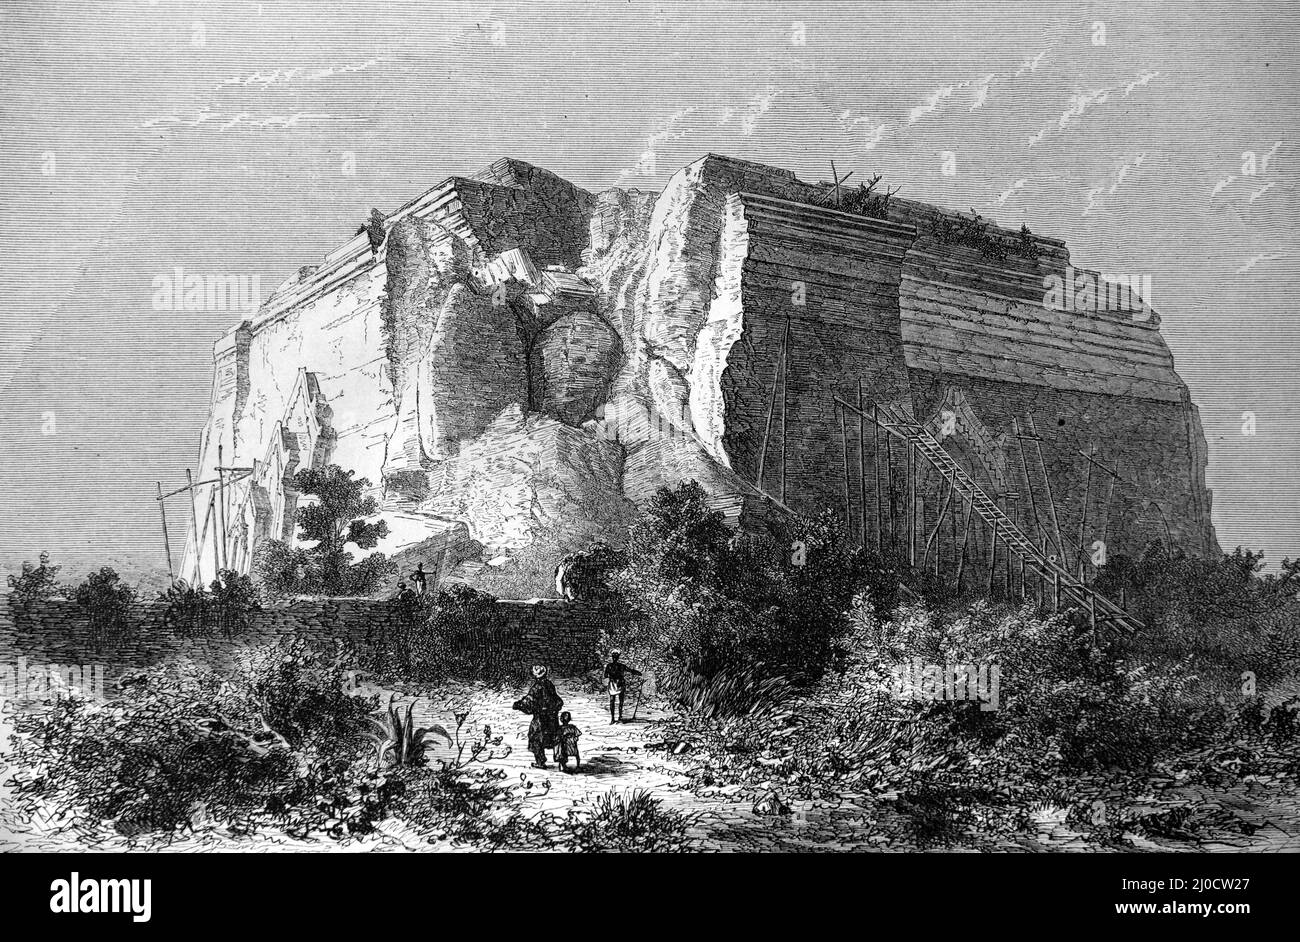 Mingun Pahtodawgyi (1790) or Ruined Mingun Temple Stupa, after being damaged by an earthquake in 1839, Sagaing Region, Burma or Central Myanmar. Vintage Illustration or Engraving 1860. Stock Photo